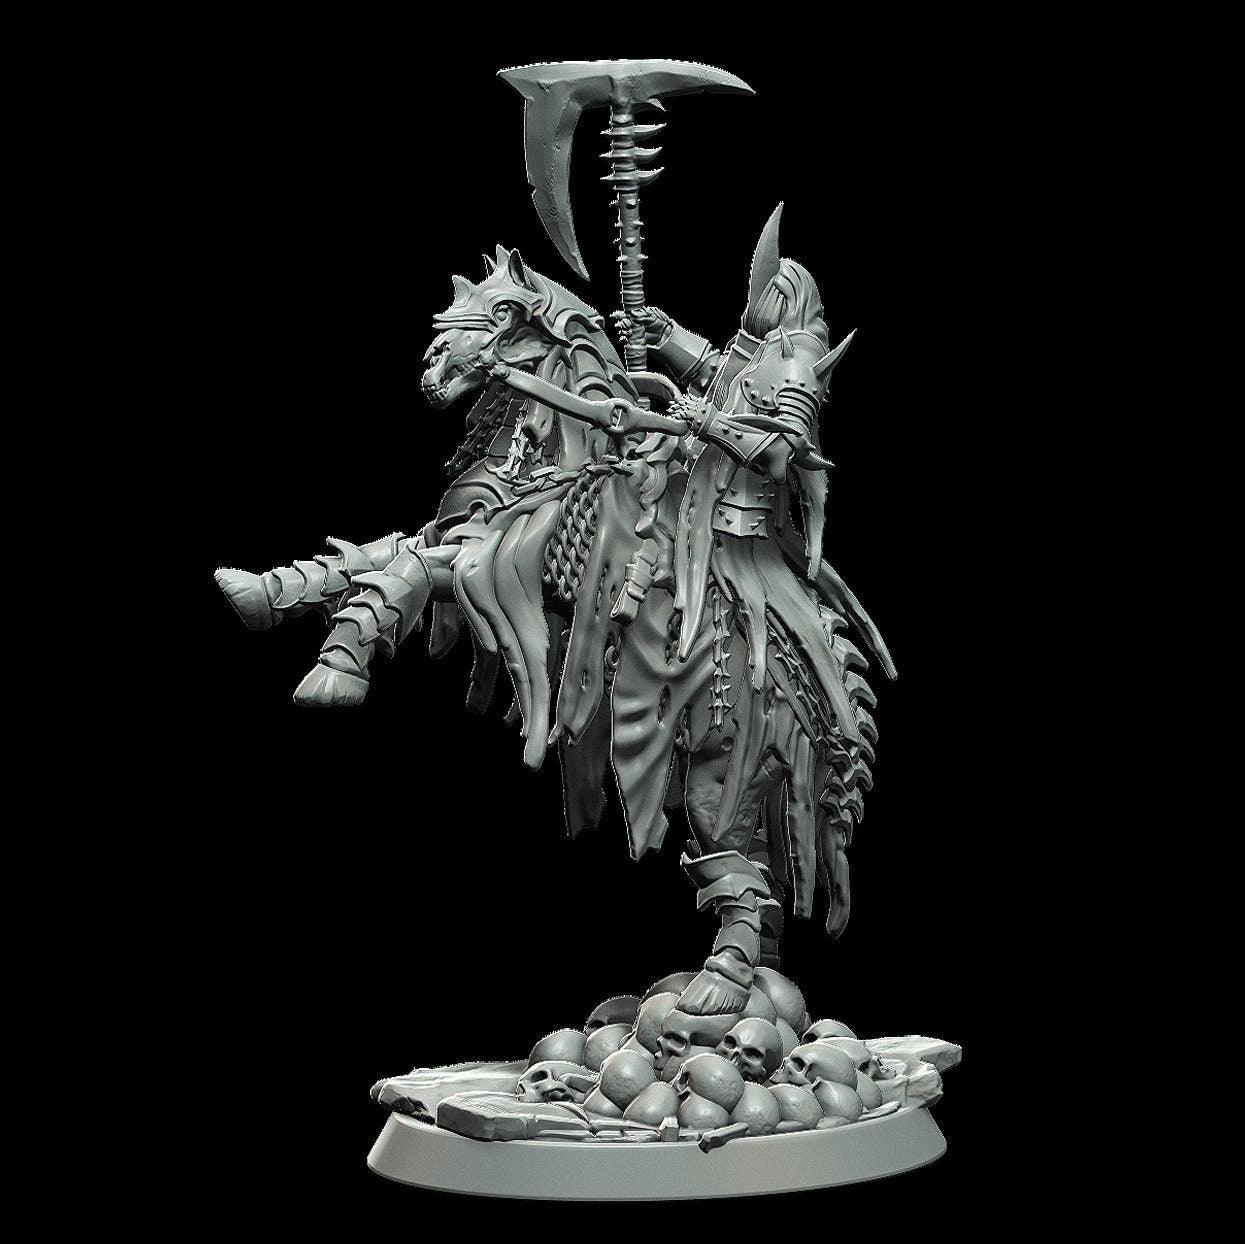 Shadow Rider Miniature 28mm scale Tabletop gaming DnD Miniature Dungeons and Dragons,dnd 5e - Plague Miniatures shop for DnD Miniatures